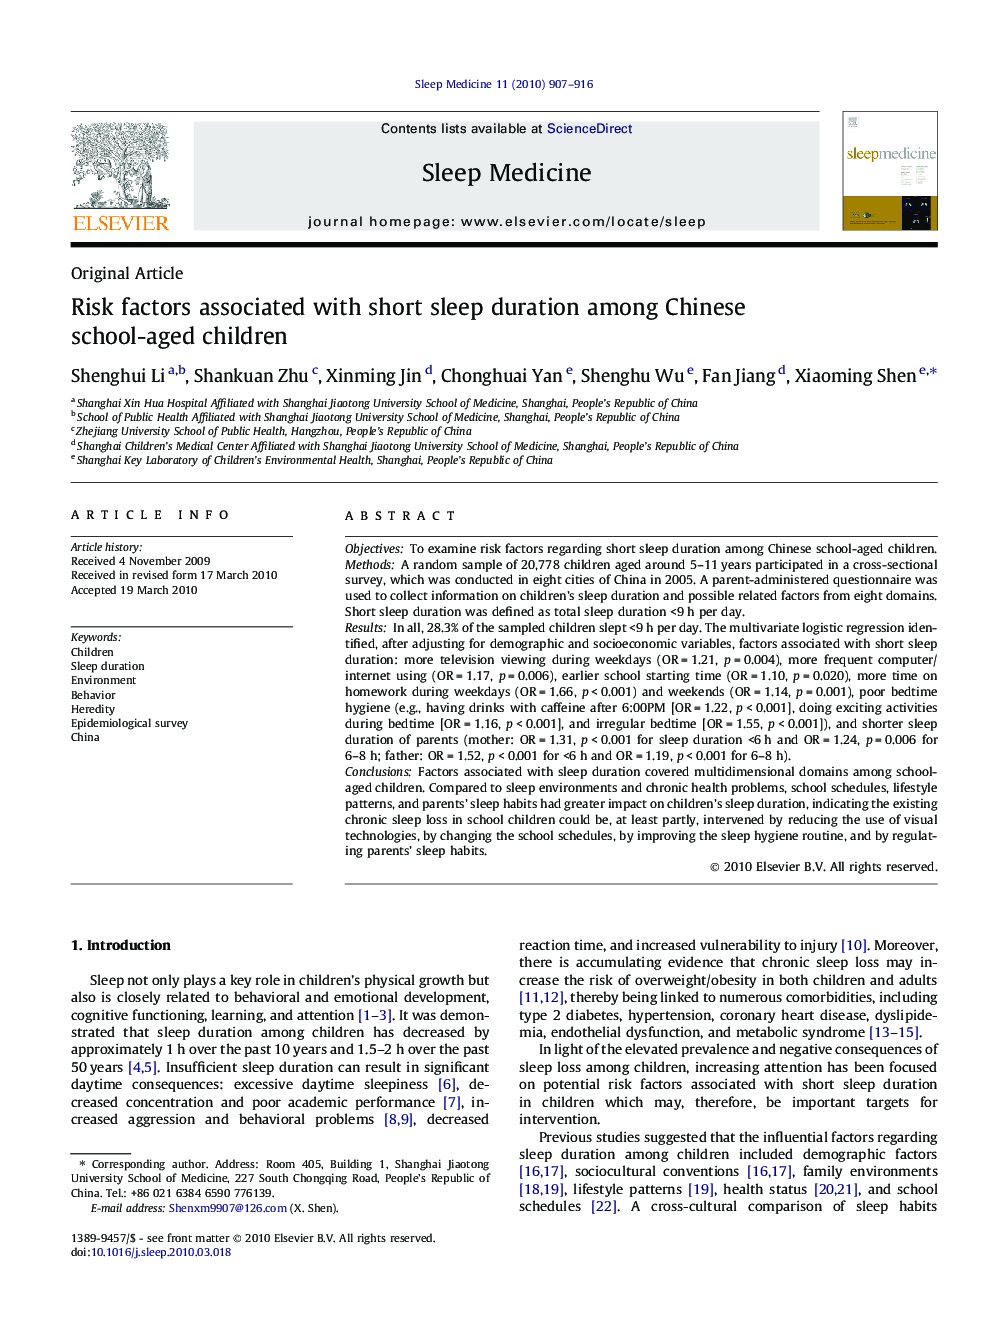 Risk factors associated with short sleep duration among Chinese school-aged children